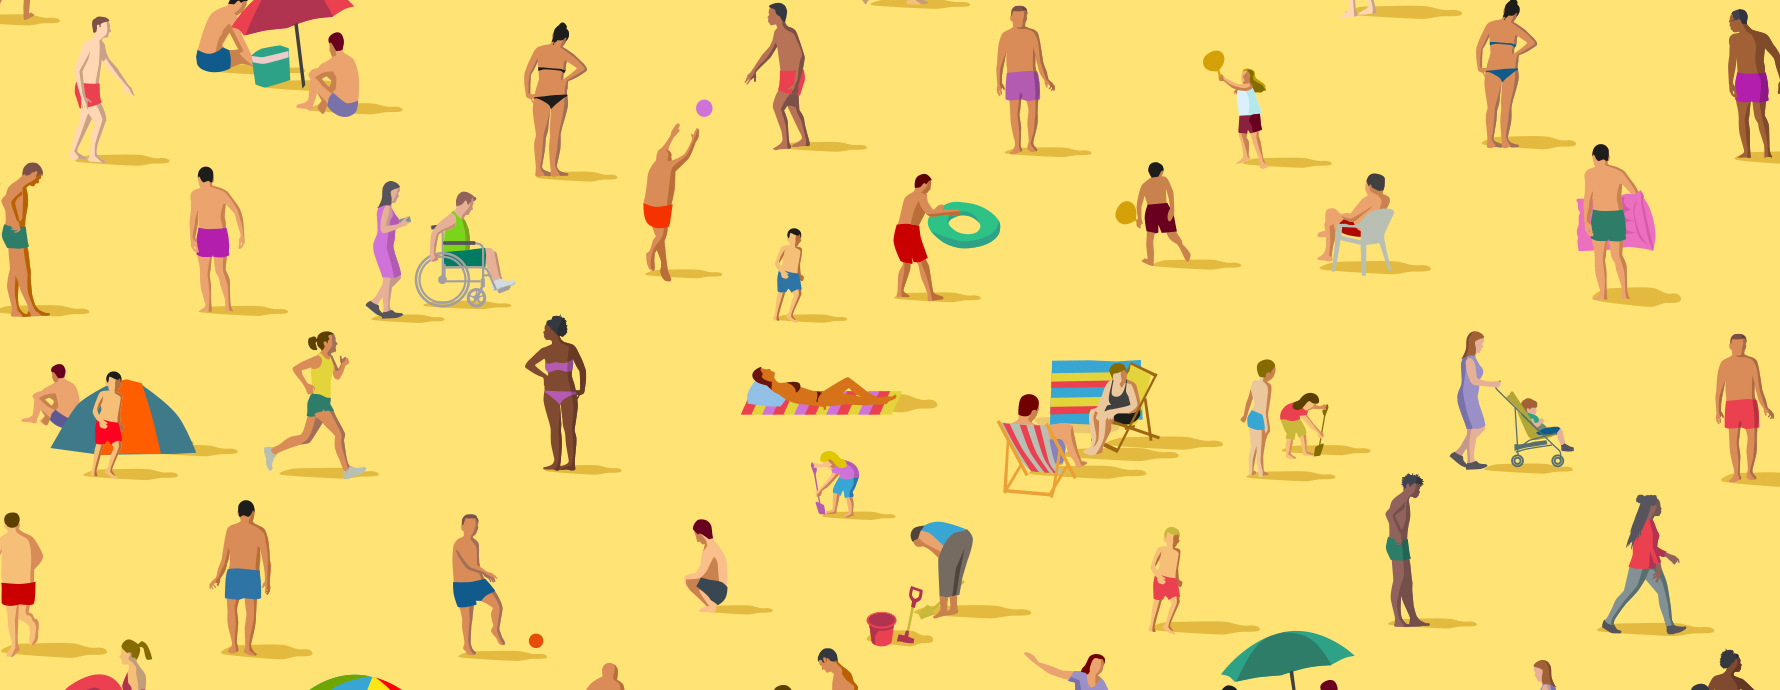 illustrations of many people at the beach